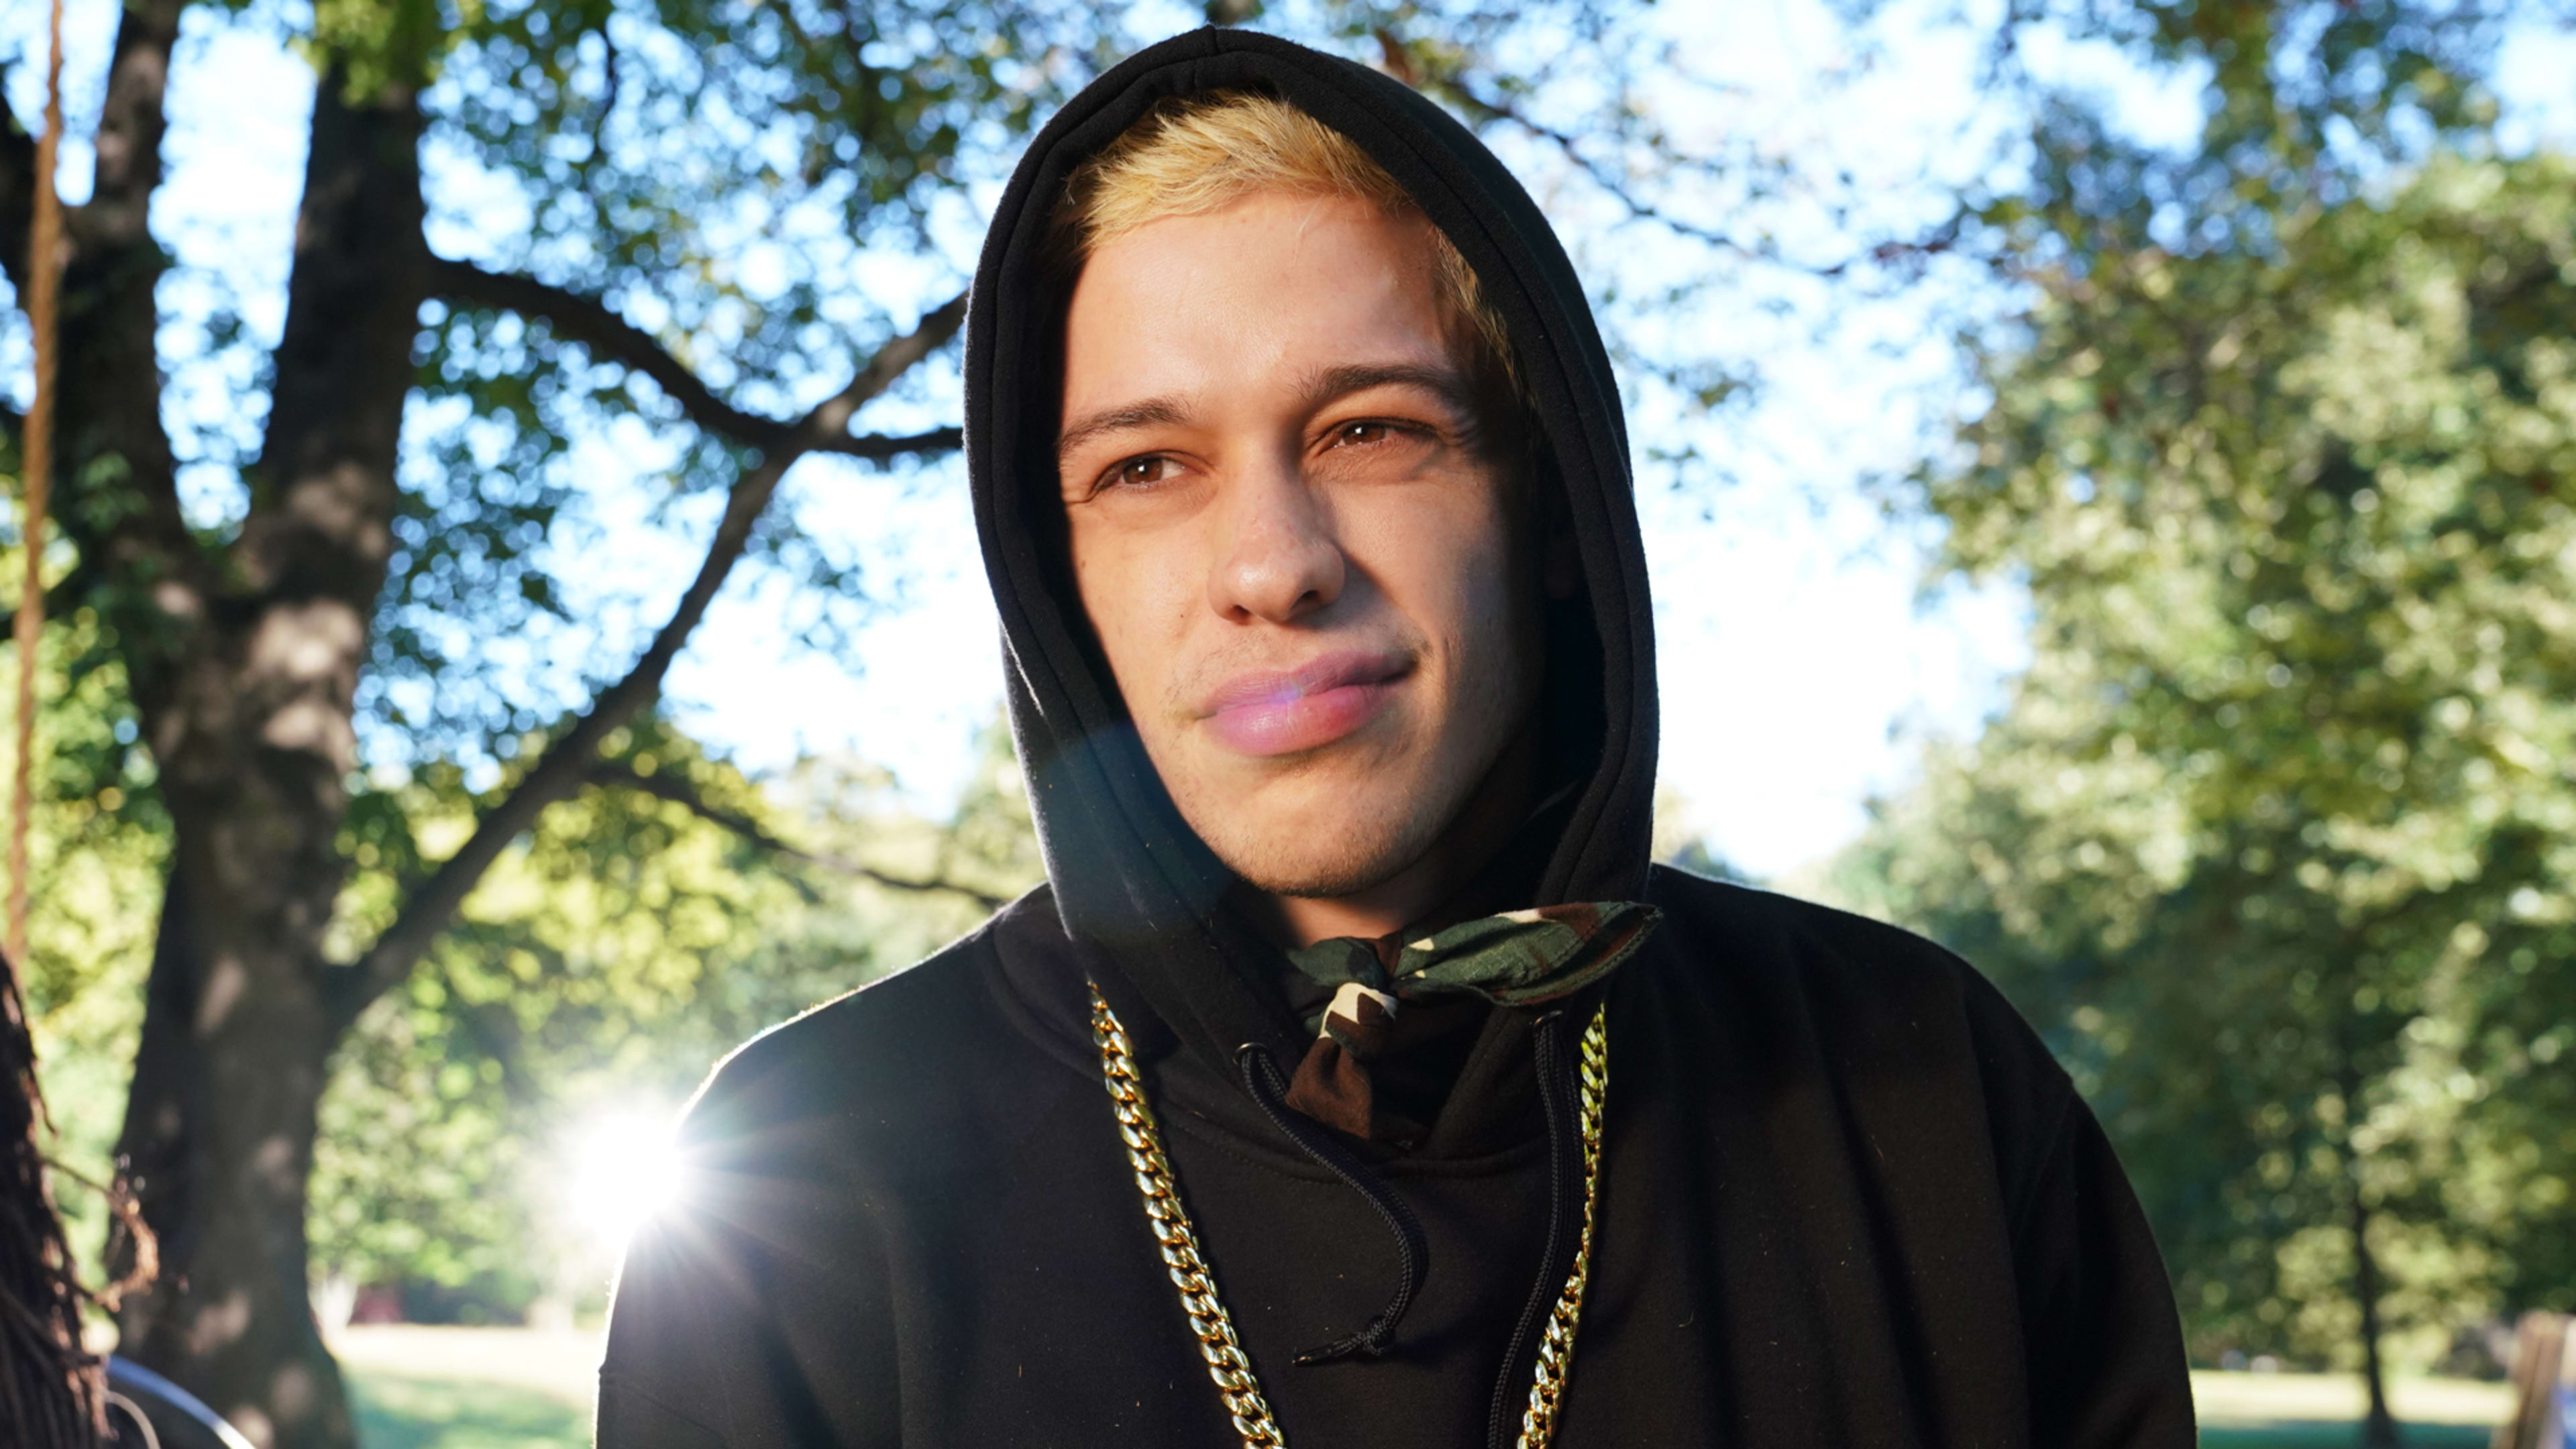 GoFundMe seems to have taken down a page for “homeless” Pete Davidson